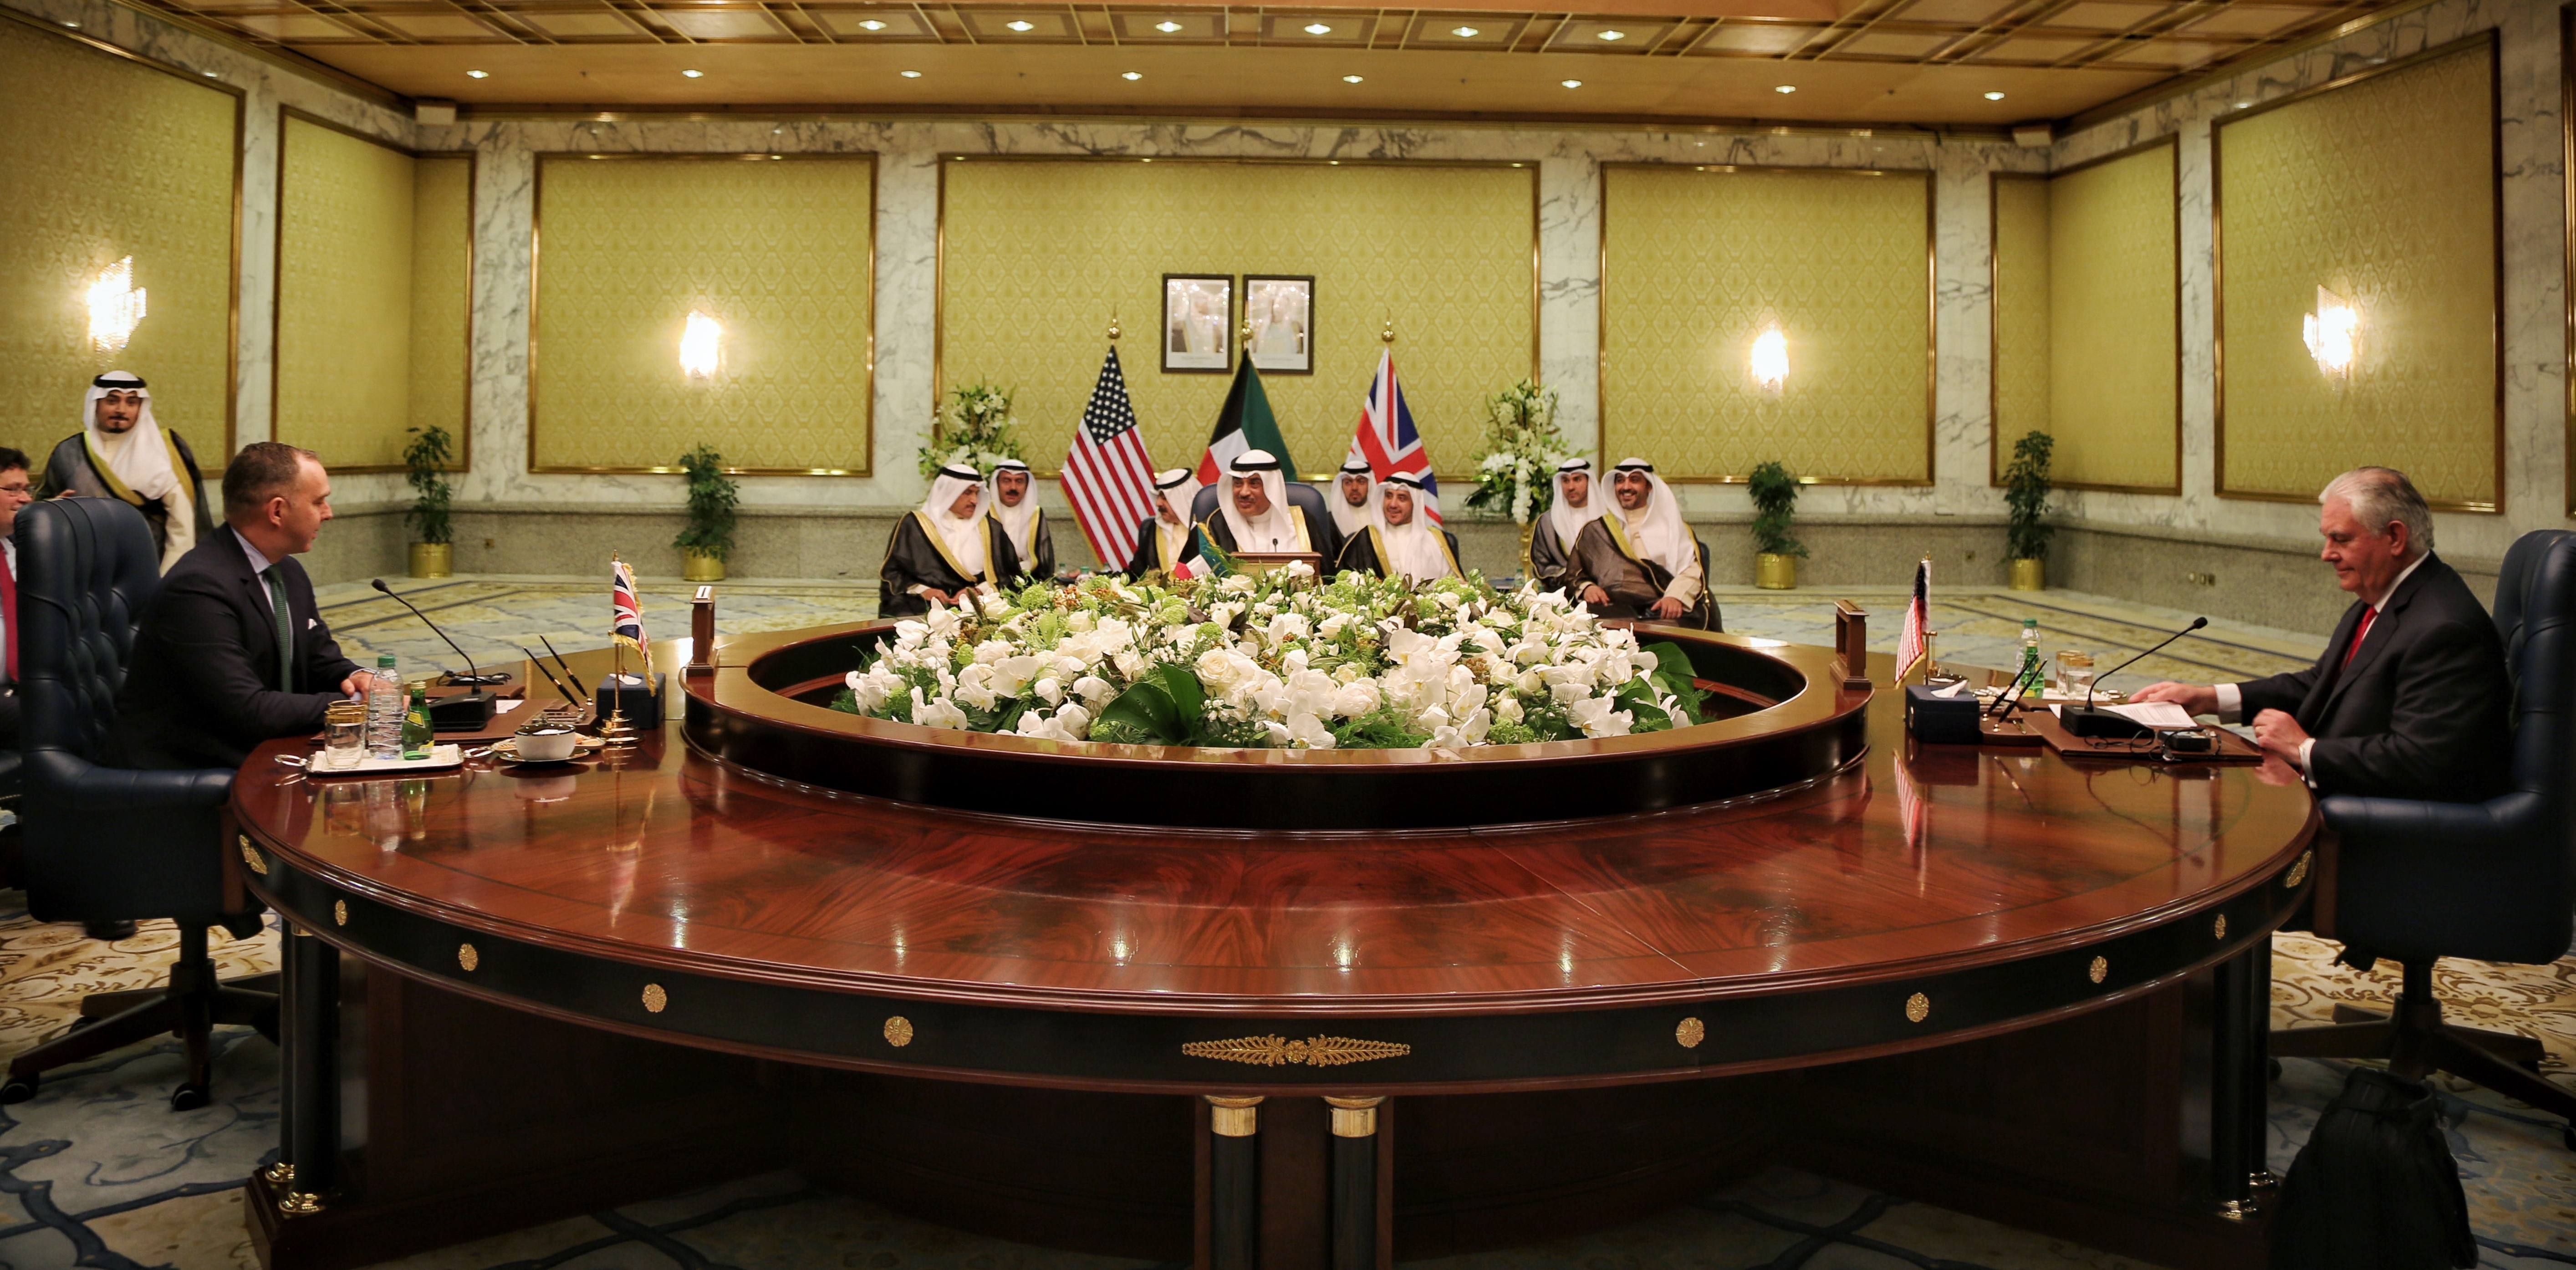 Kuwait's Acting Prime Minister and Foreign Minister Sheikh Sabah Khaled Al-Hamad Al-Sabah meets US Secretary of State Rex Tillerson and Britain's National Security Advisor Mark Sedwill